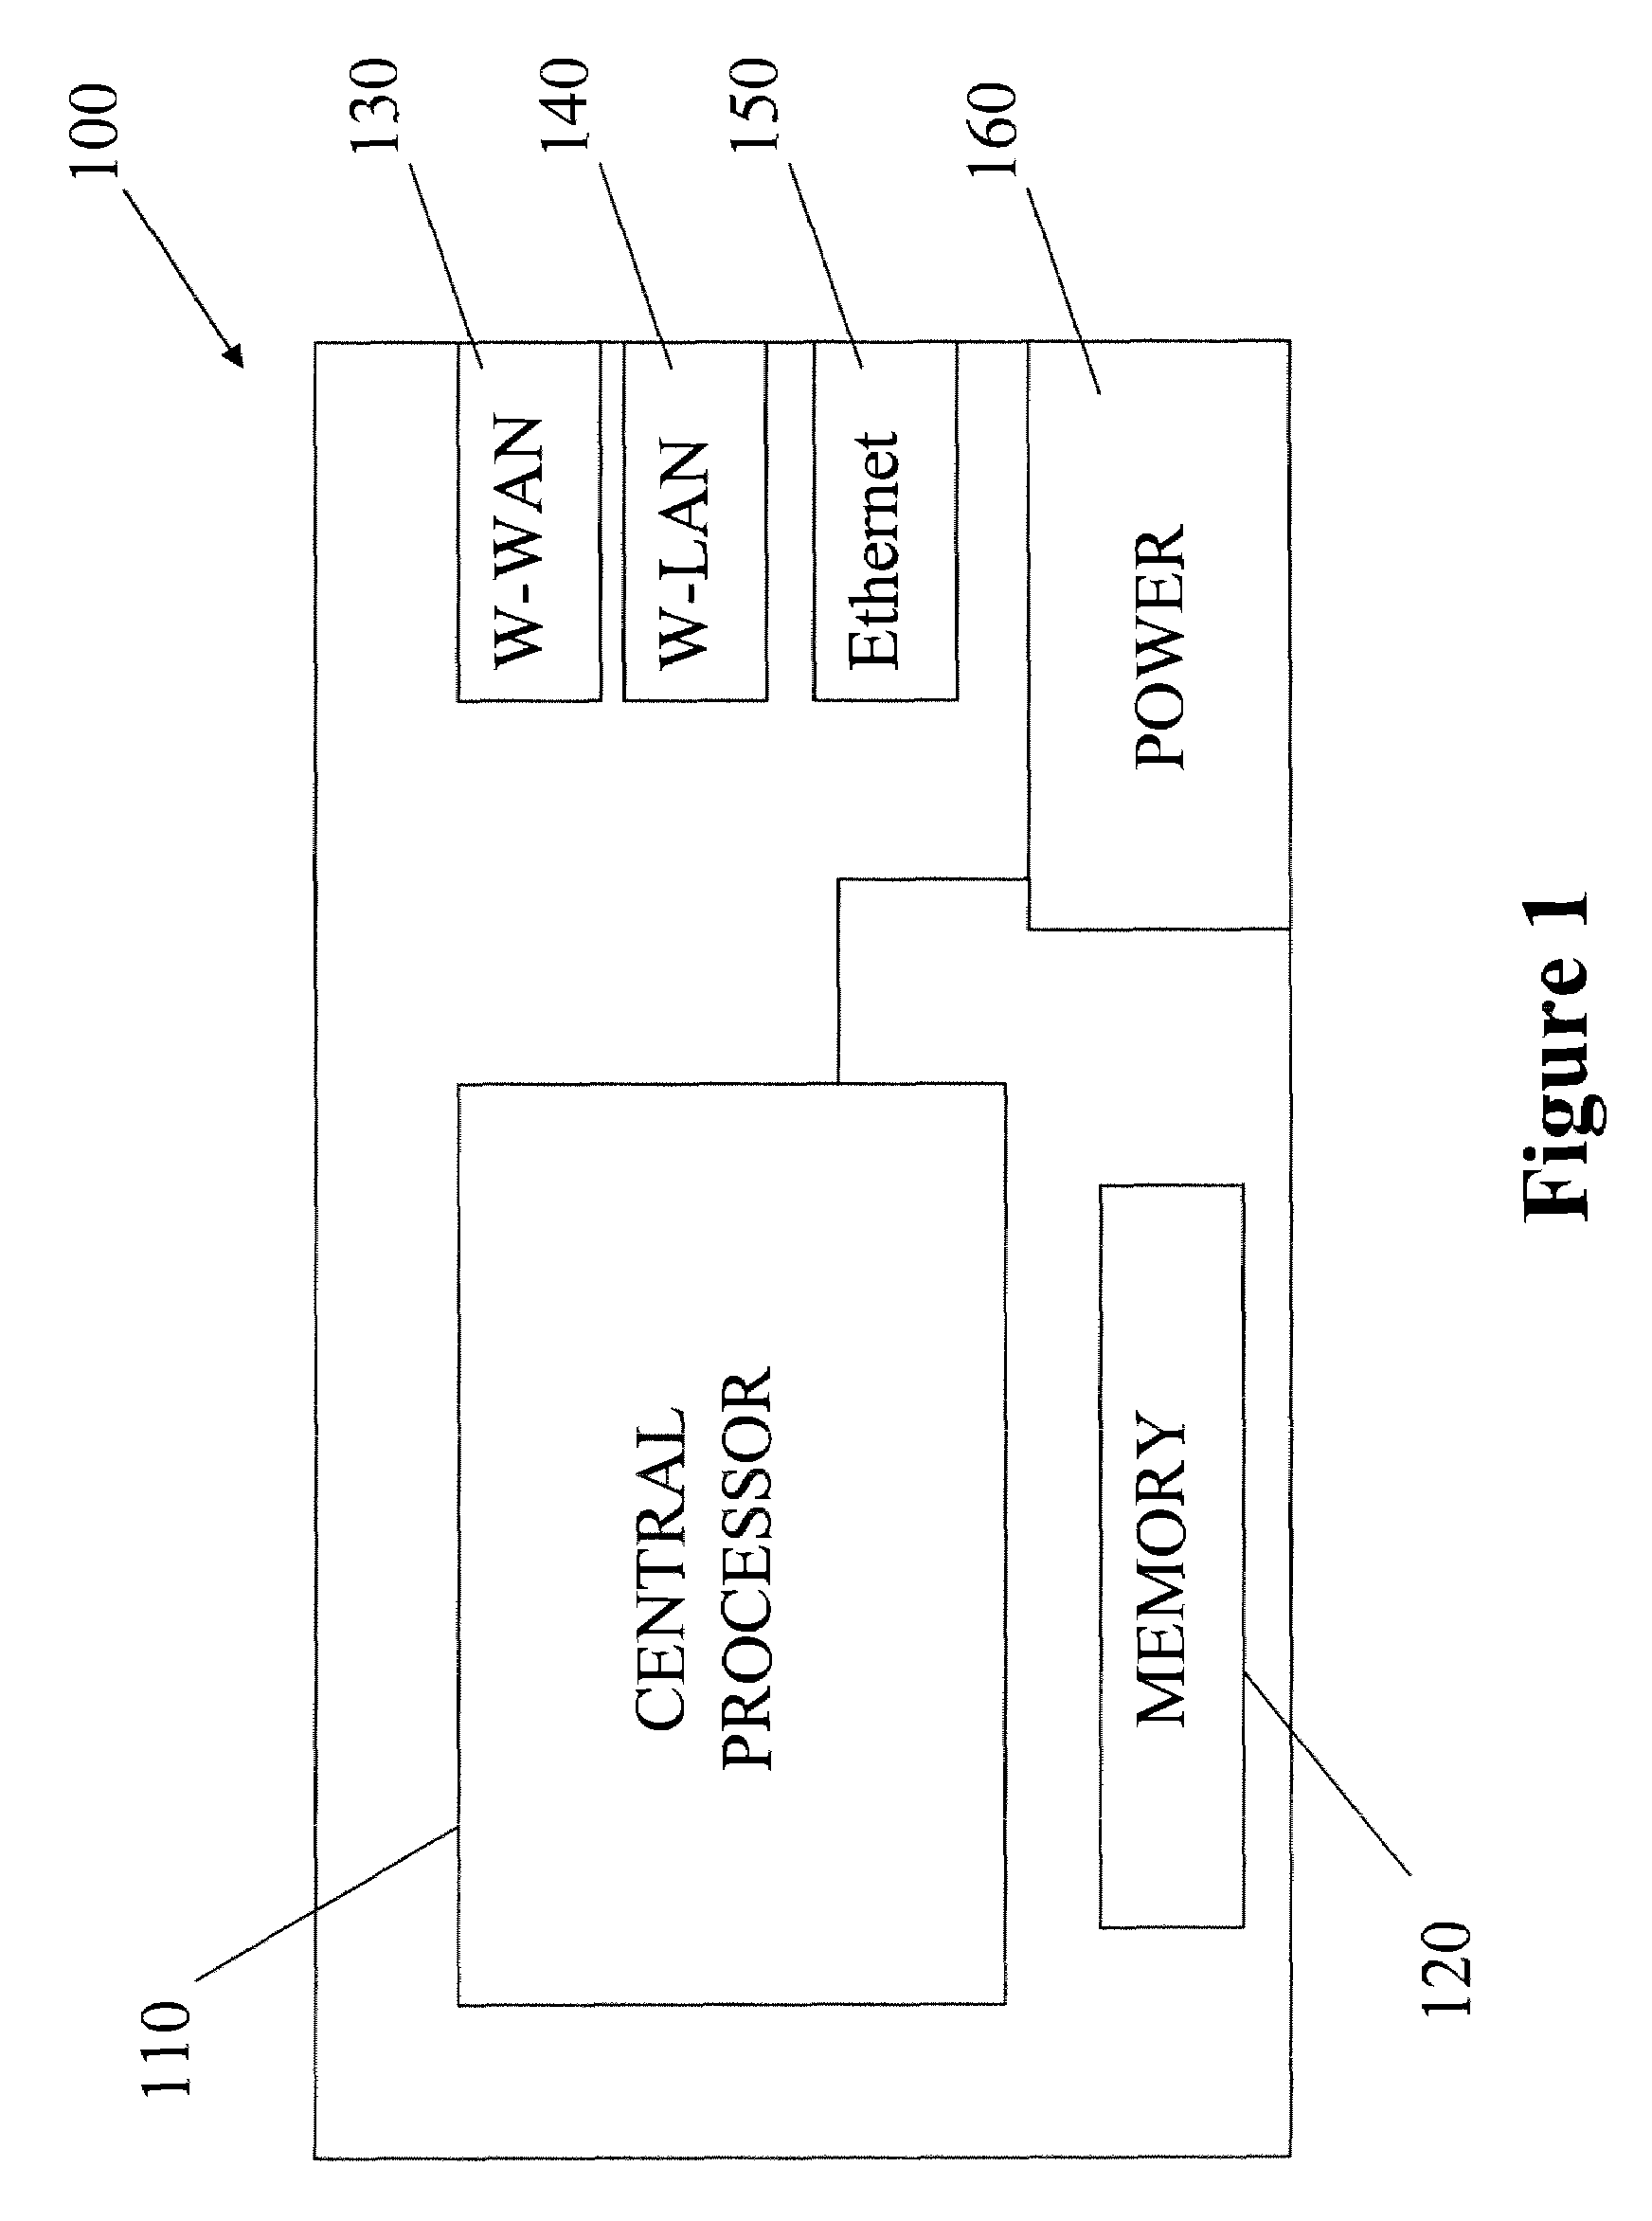 System and method for remote operation of a node